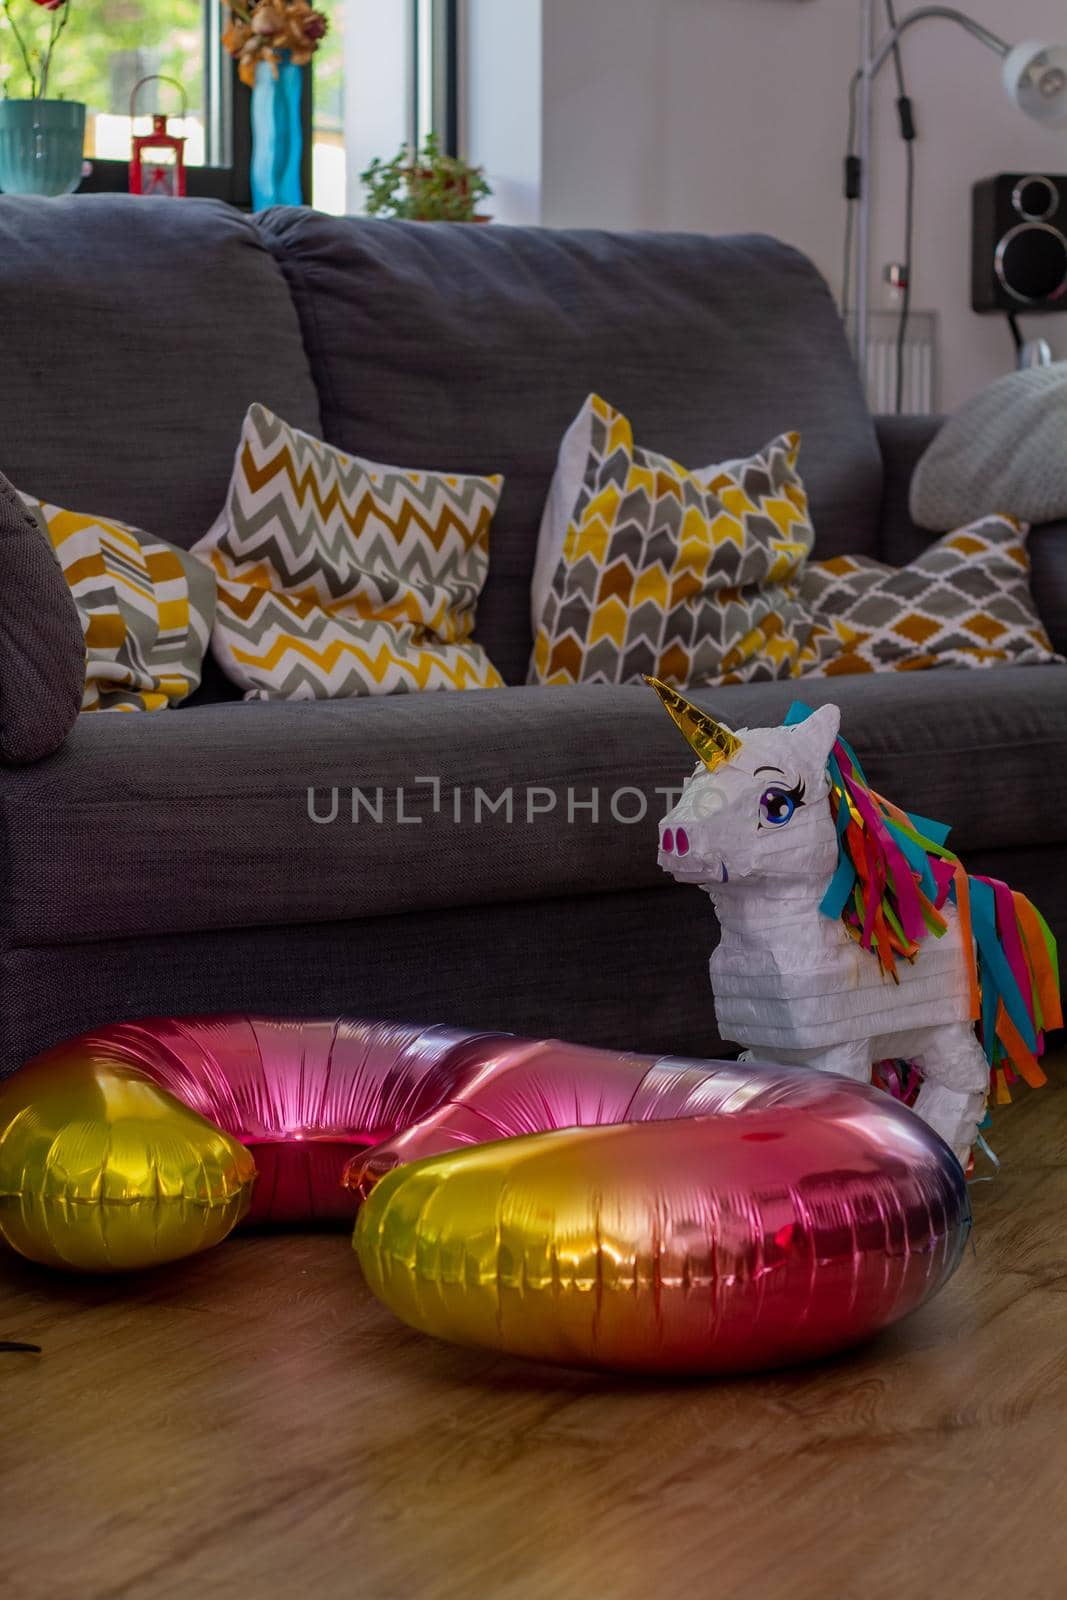 Birthday Decorations In A Living Room By A Sofa by AlbertoPascual